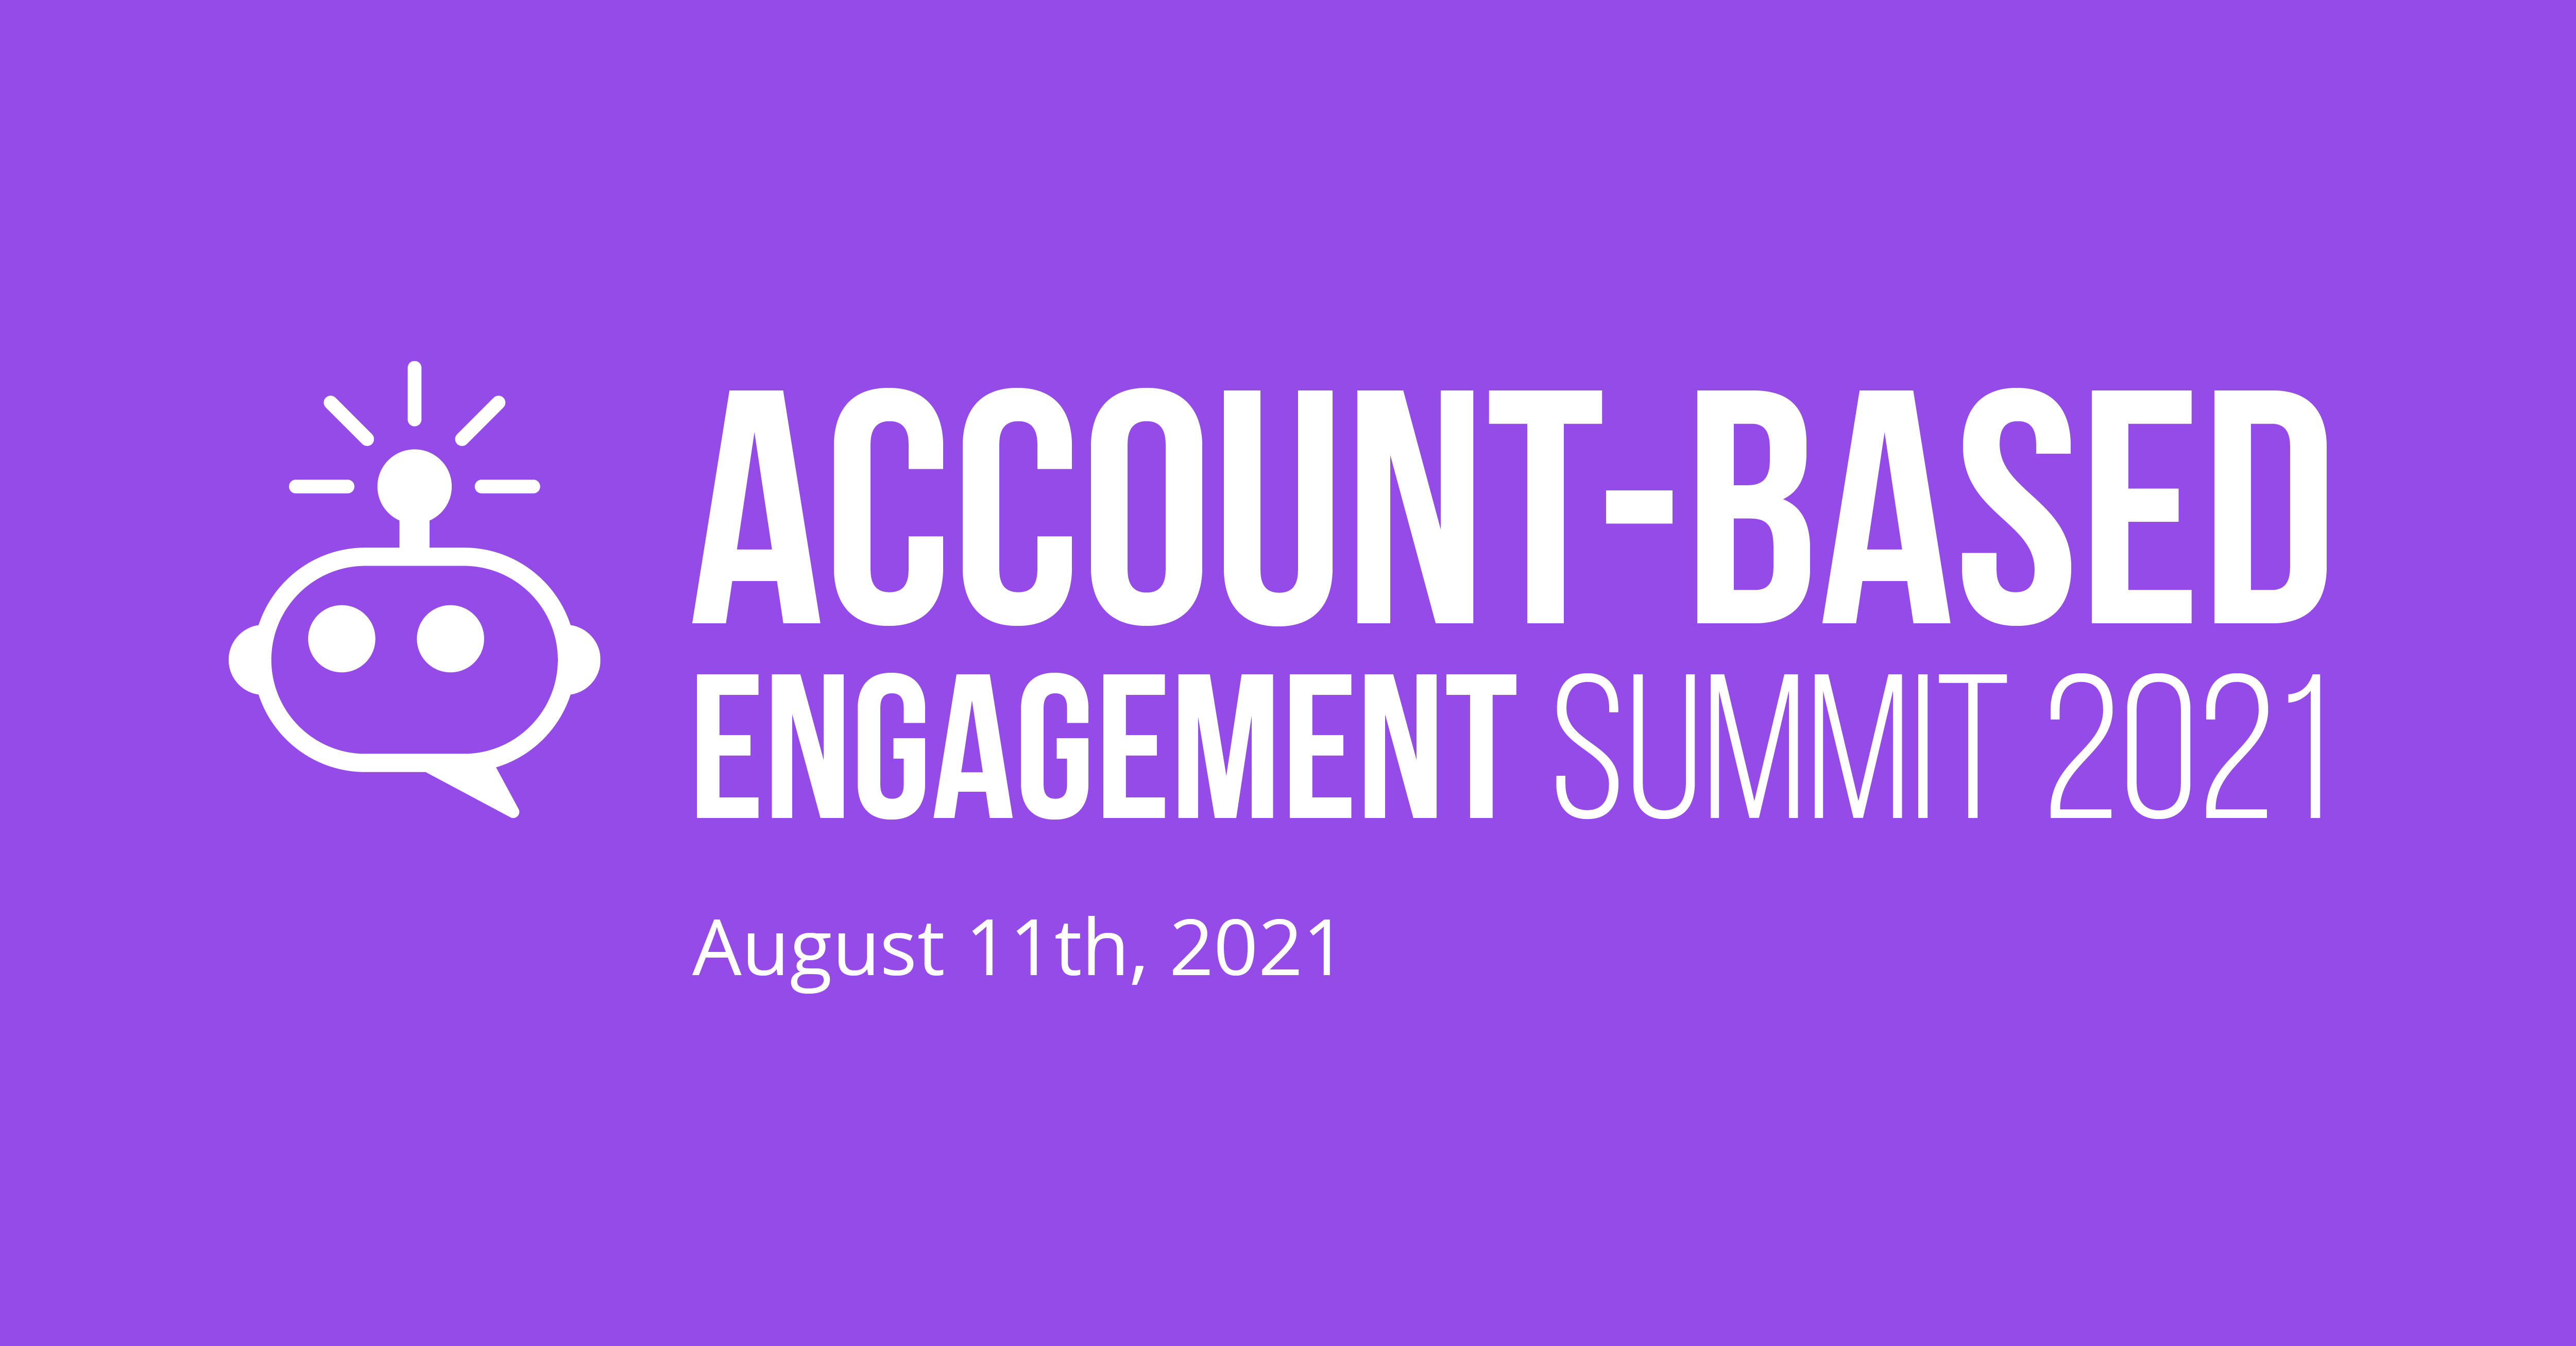 account-based engagement summit 2021 august 11th